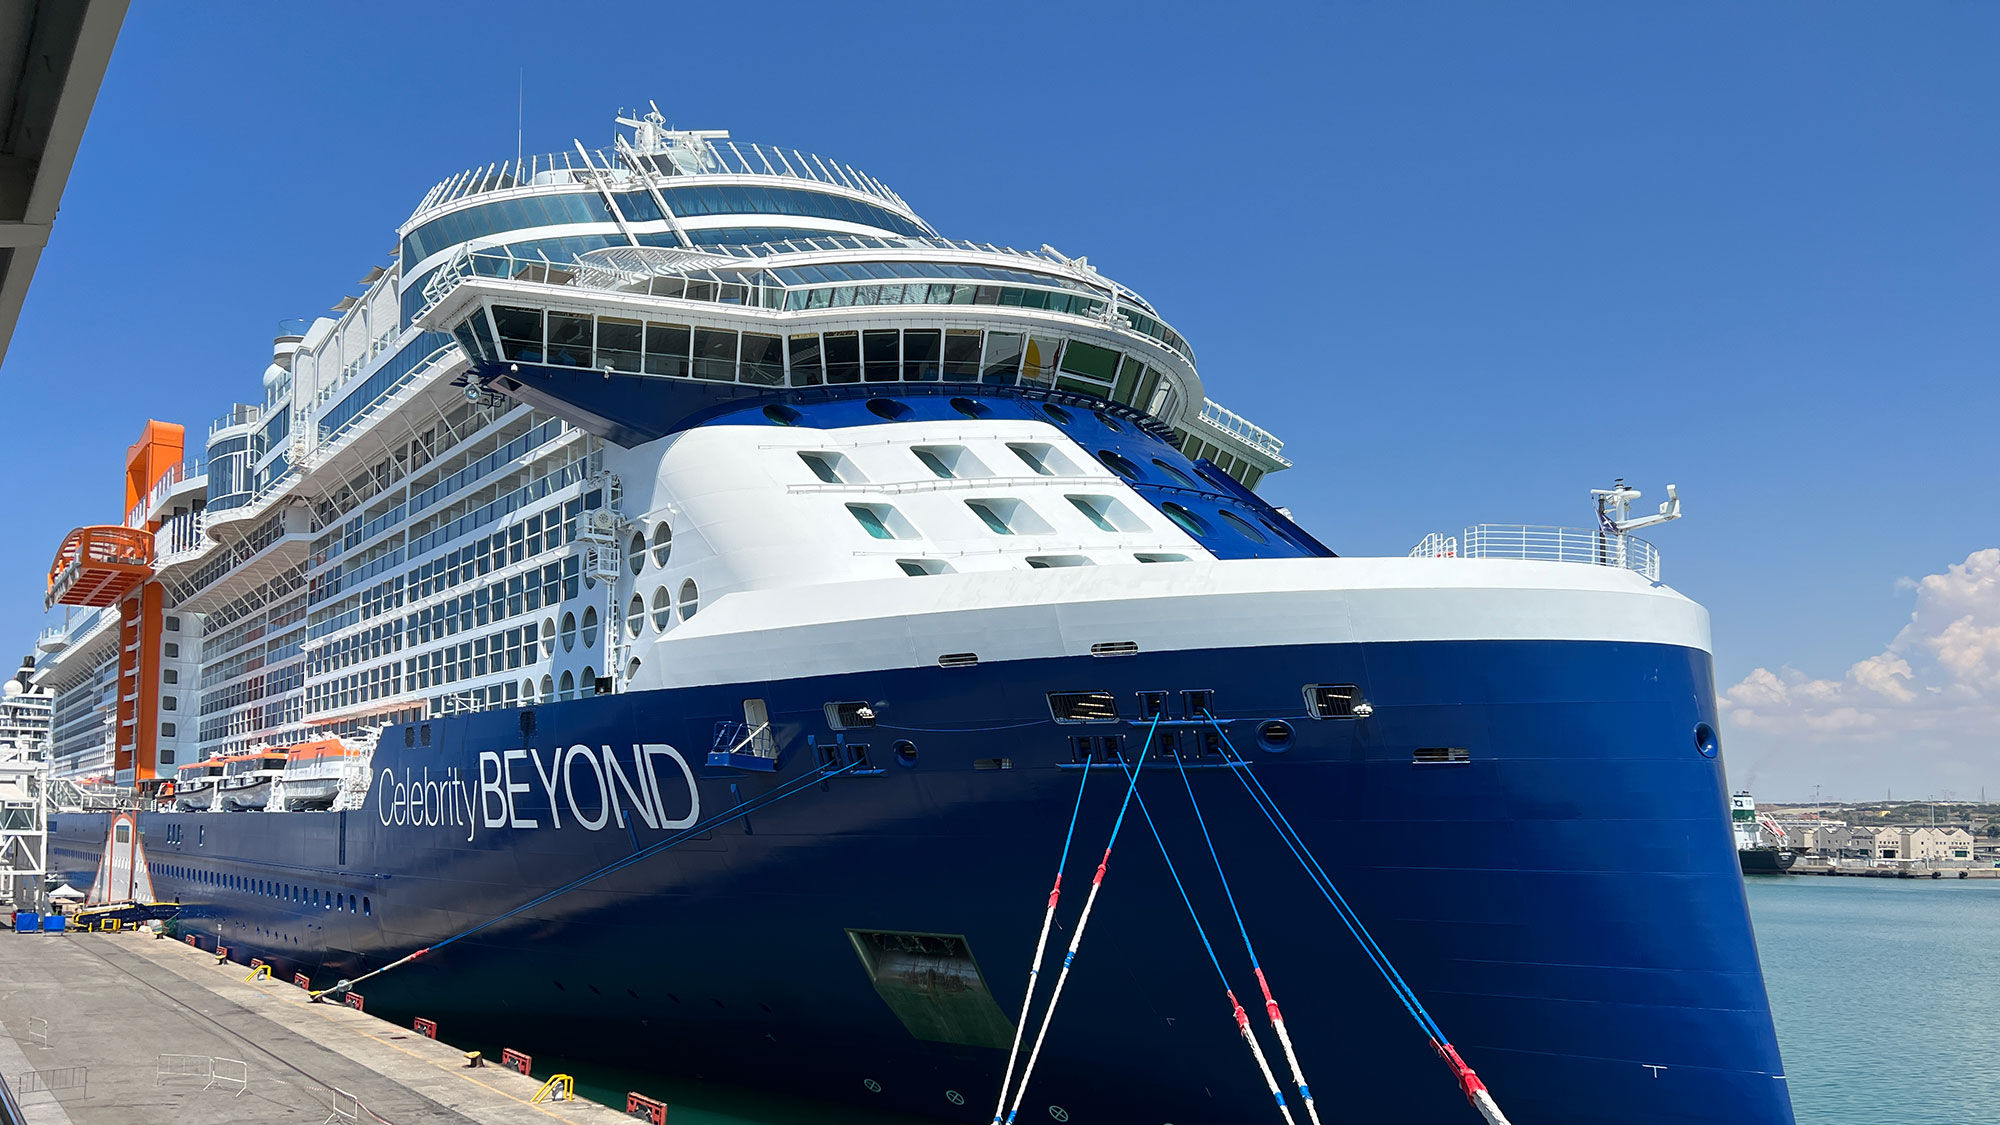 Celebrity Beyond is a ship made for longer sailings: Travel Weekly